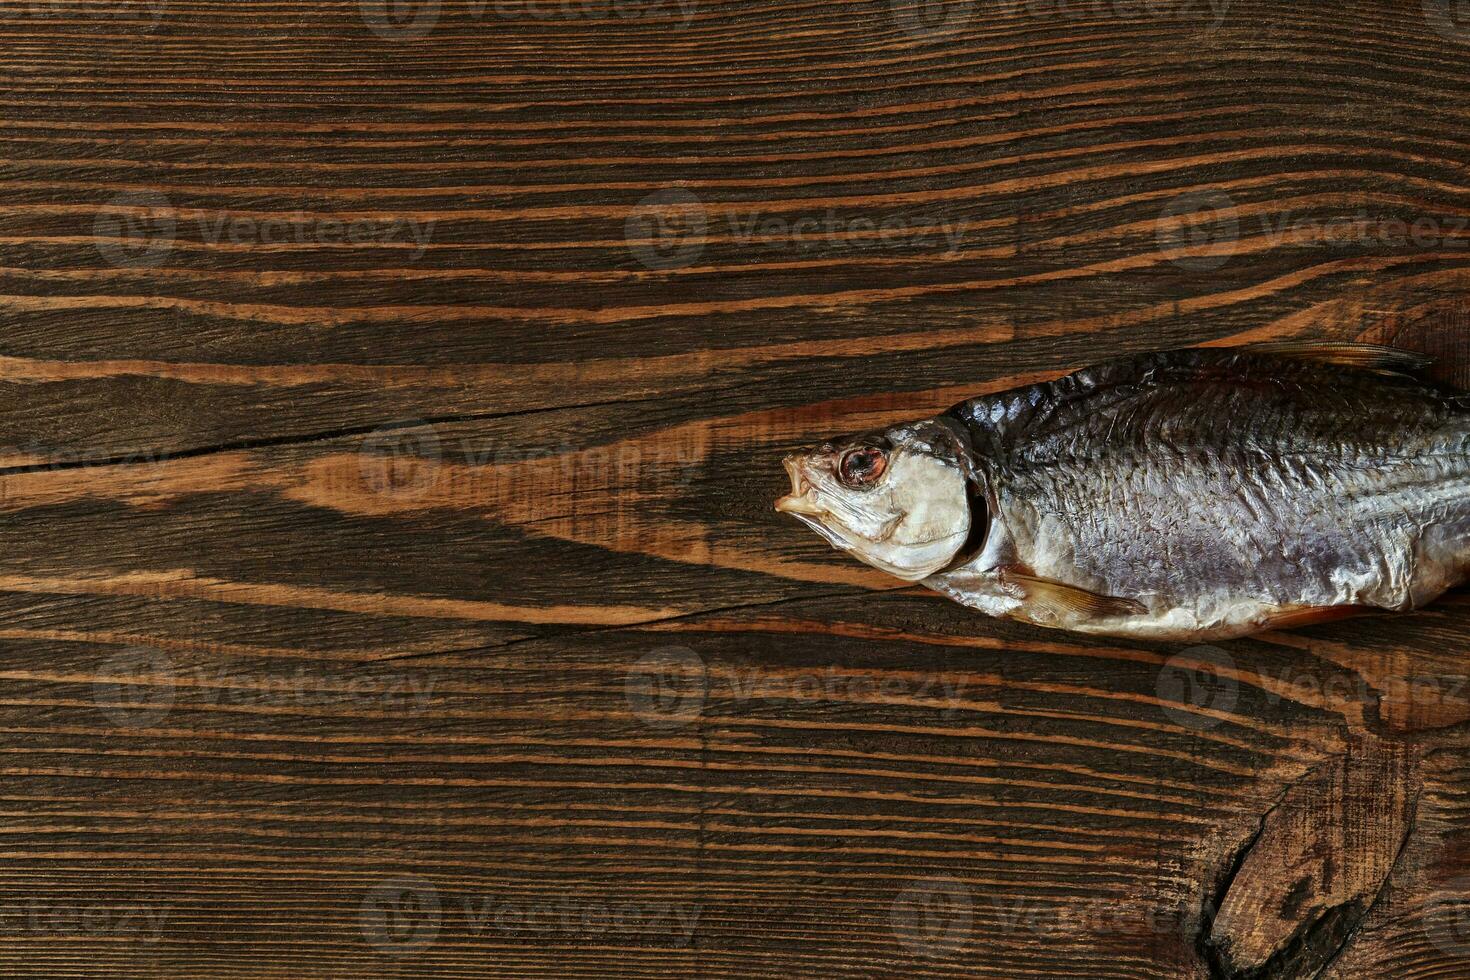 One dried or jerky salted roach, tasty clipfish on wooden background. Salty beer appetizer. Traditional way of preserving fish. Close up photo